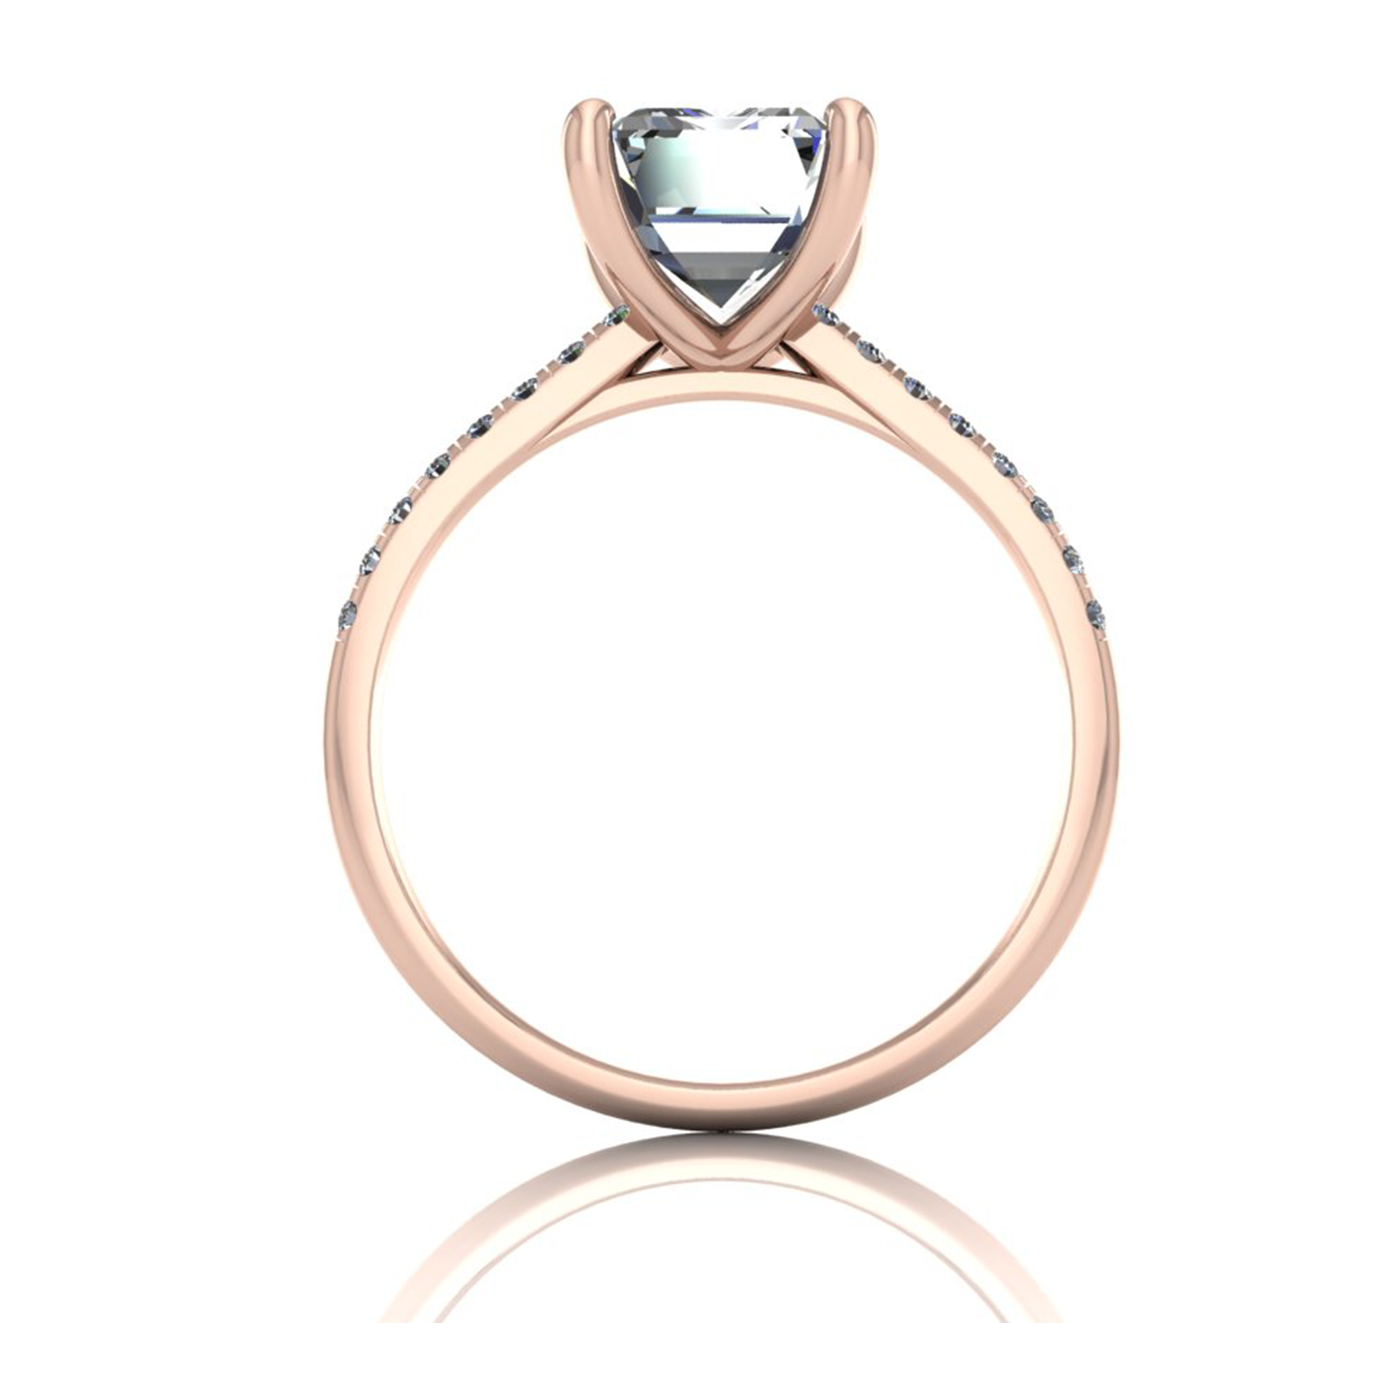 18k rose gold 2.5ct 4 prongs emerald cut diamond engagement ring with whisper thin pavÉ set band